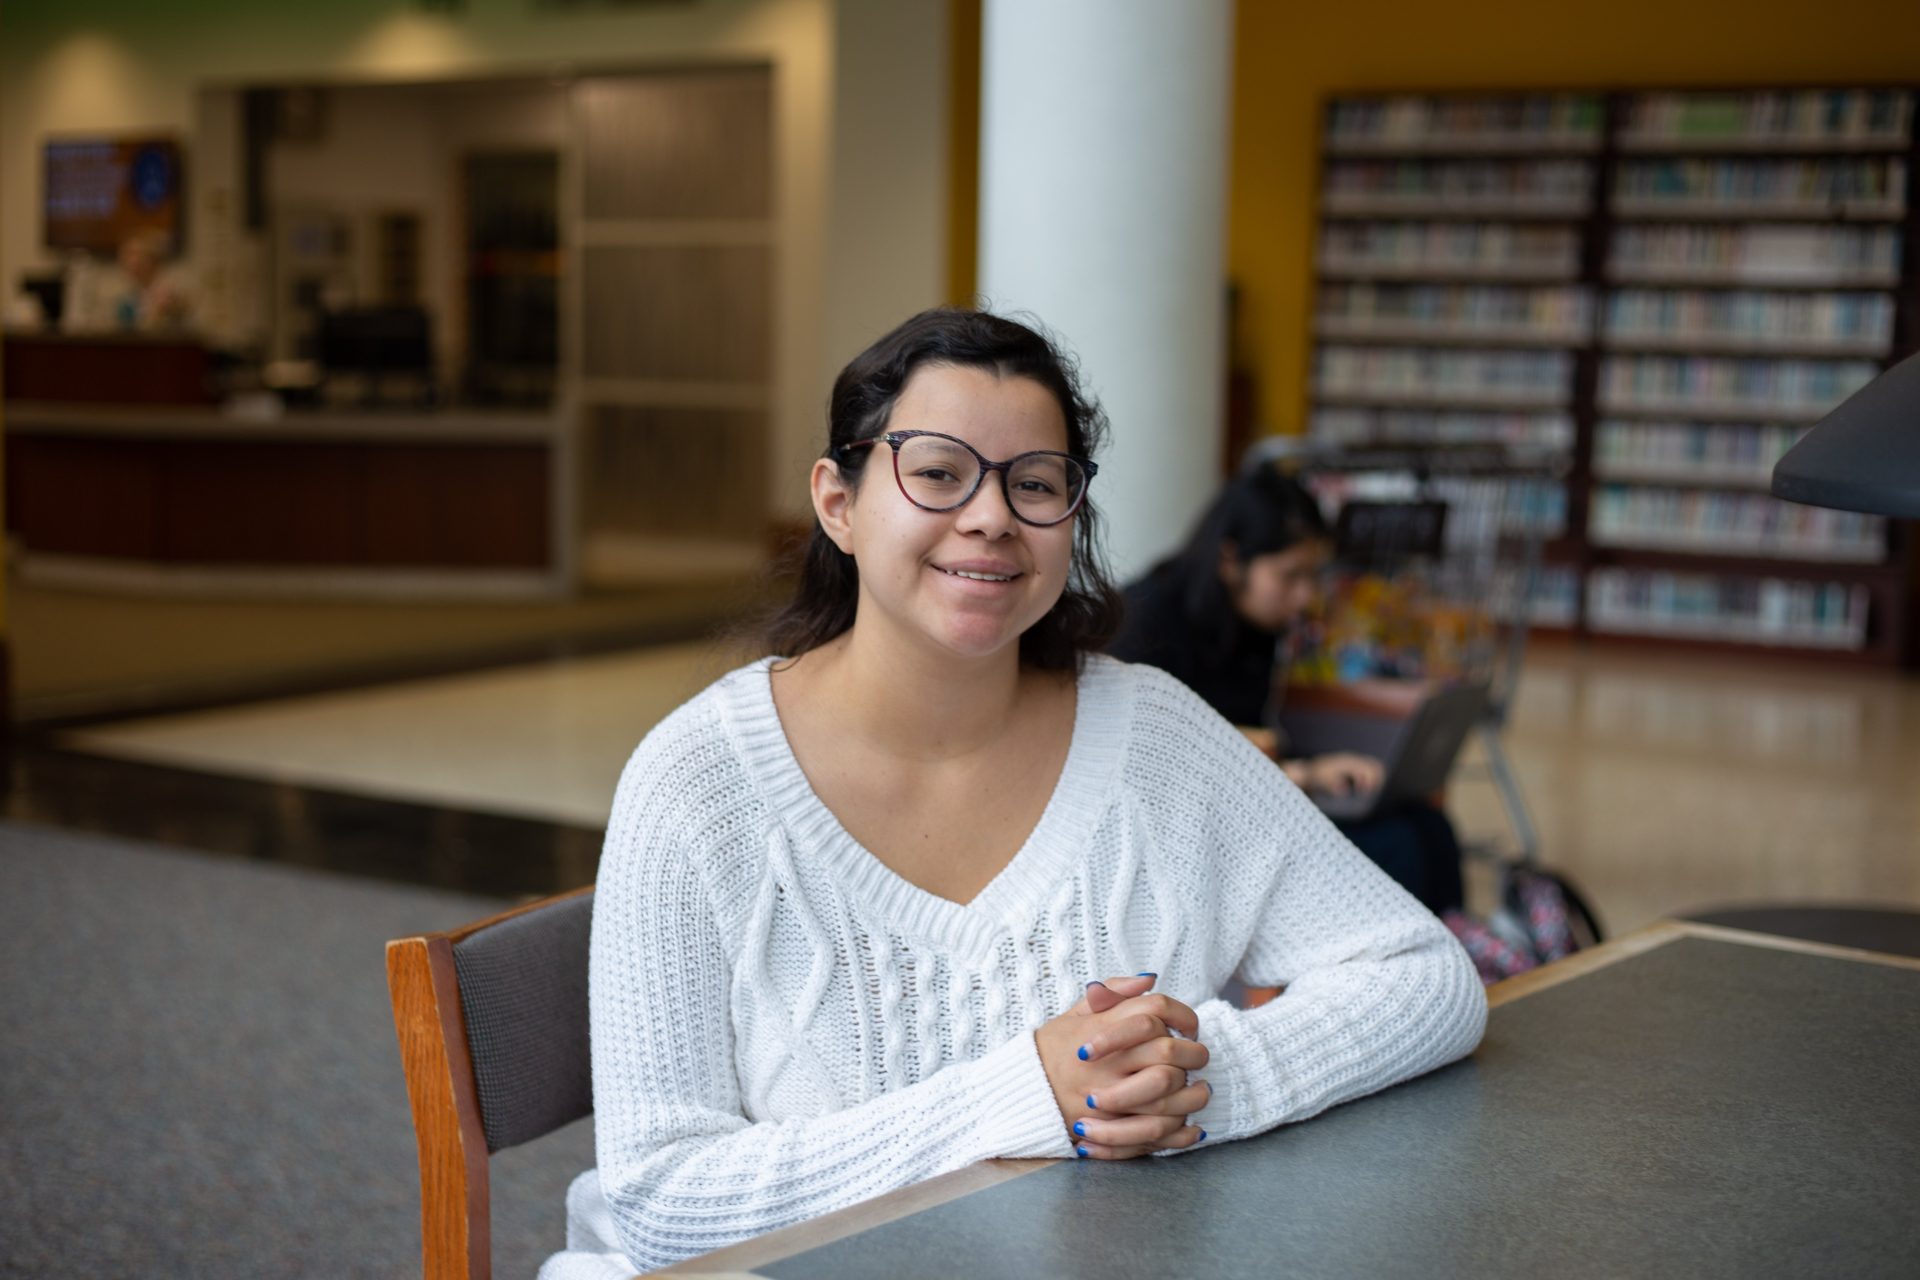 Mariana Cardenas poses in the Campbell Library.